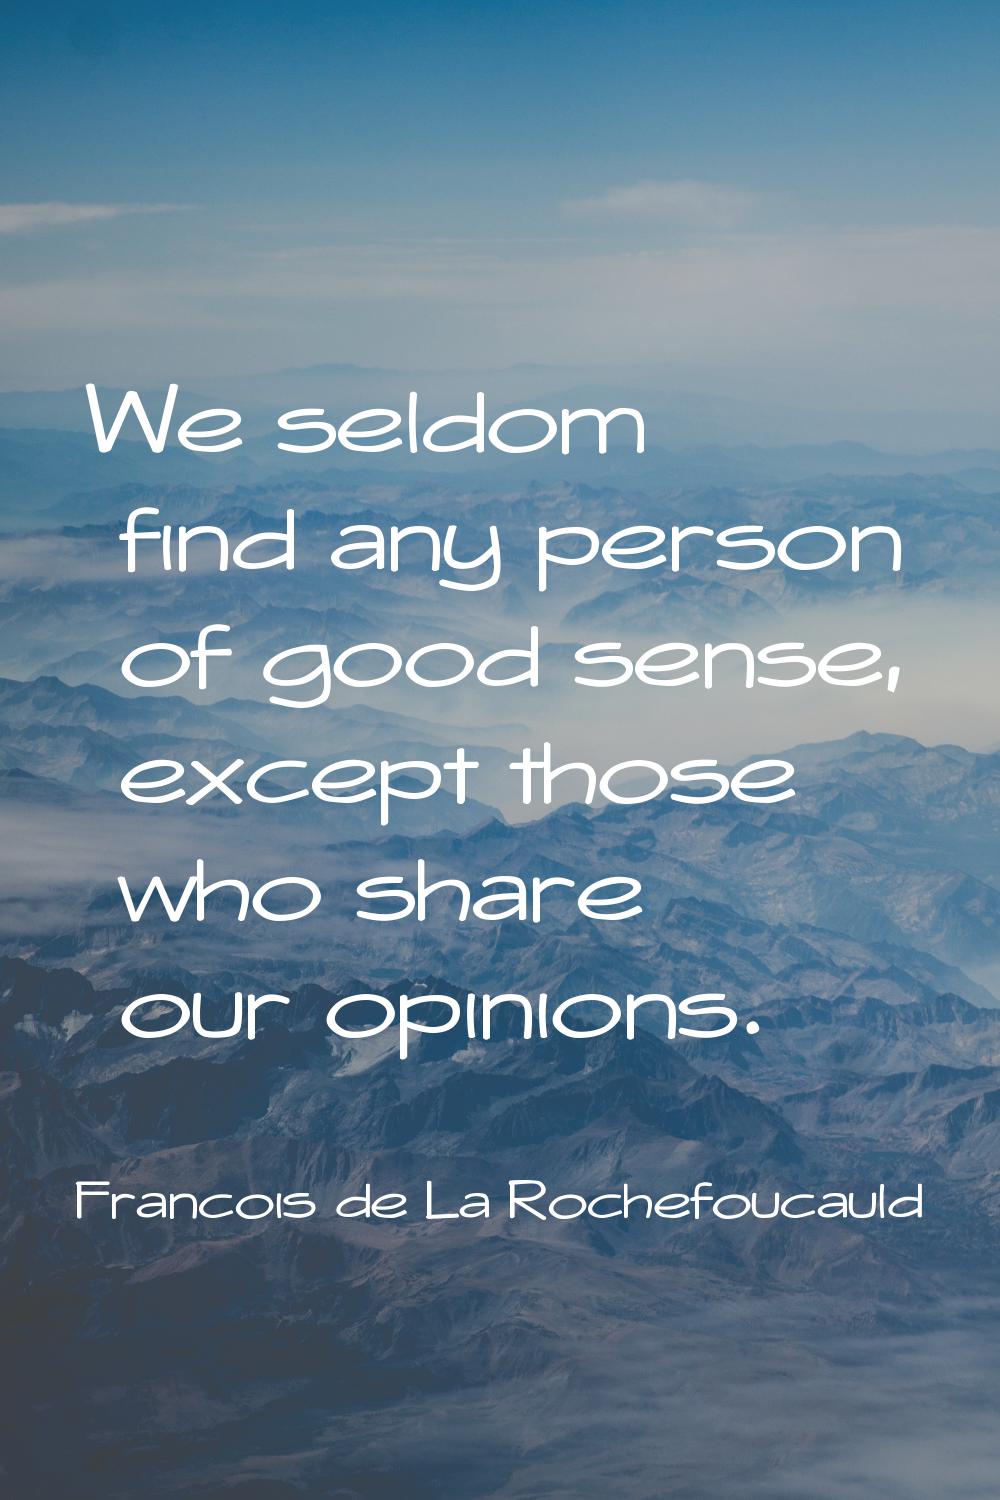 We seldom find any person of good sense, except those who share our opinions.